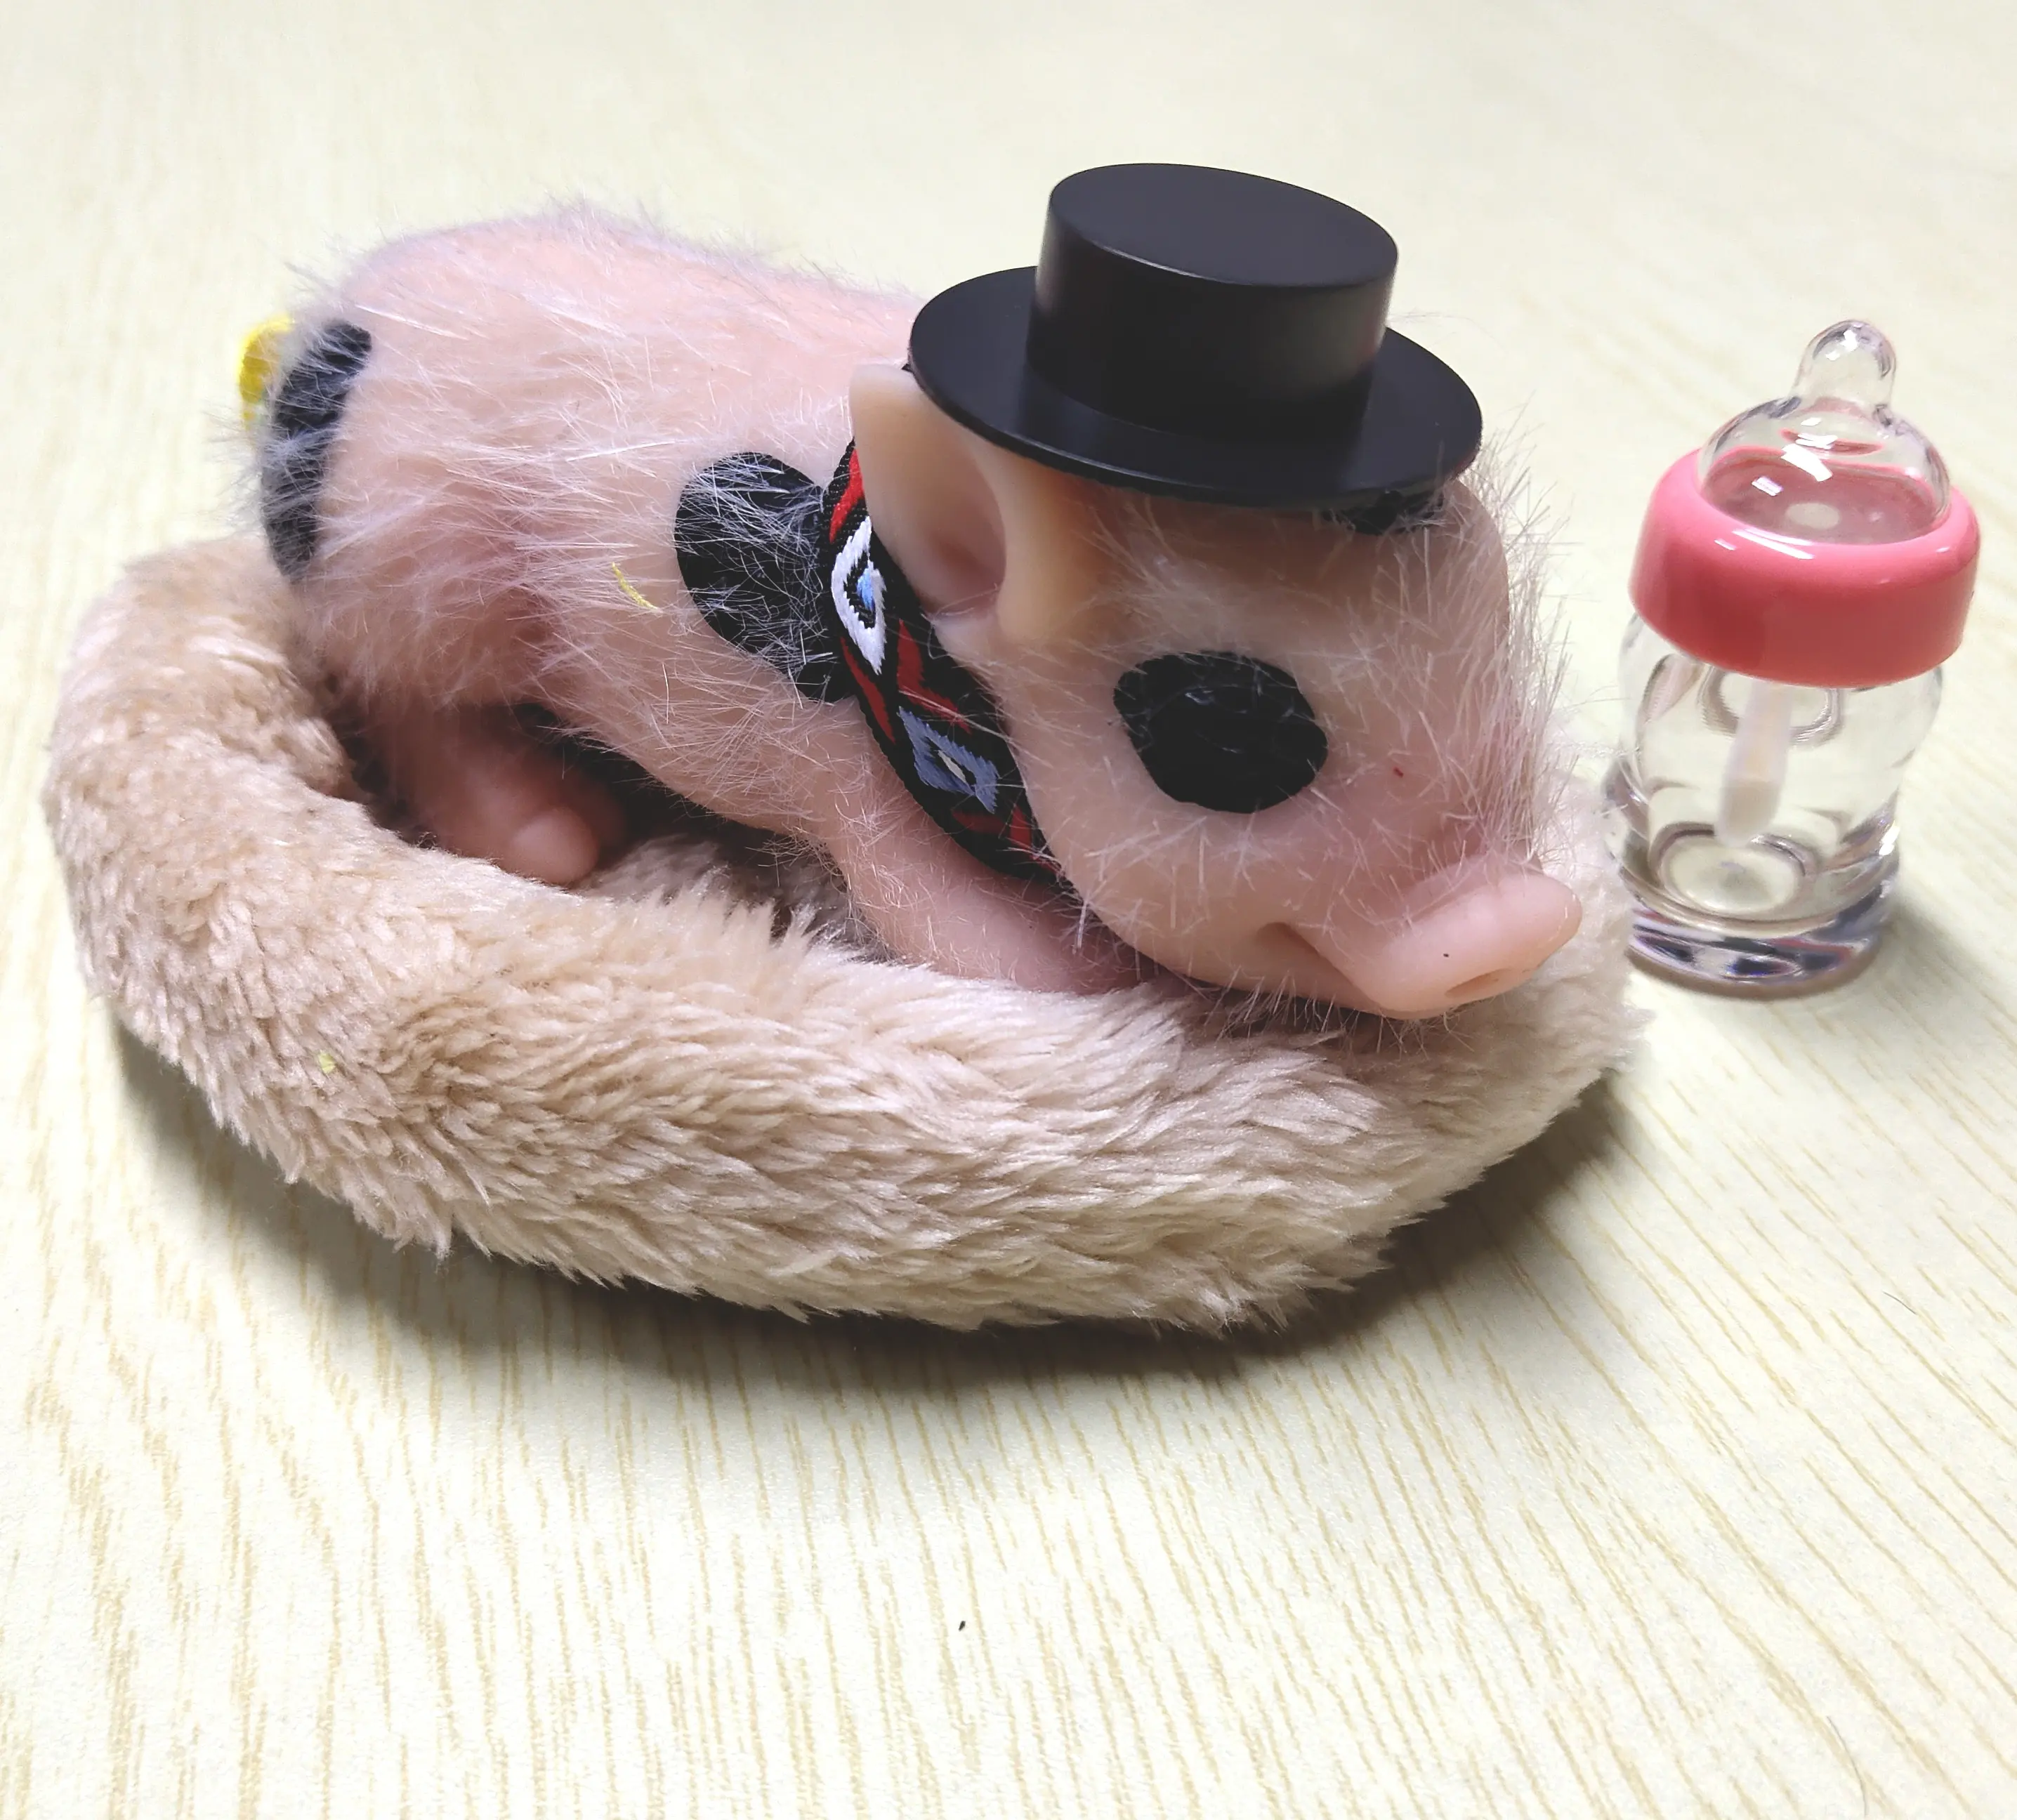 R&B New Design Lifelike Mini Soft Pink Cute Dolls Reborn Pure Full Silicone Baby Pig With Hair Hat For Children